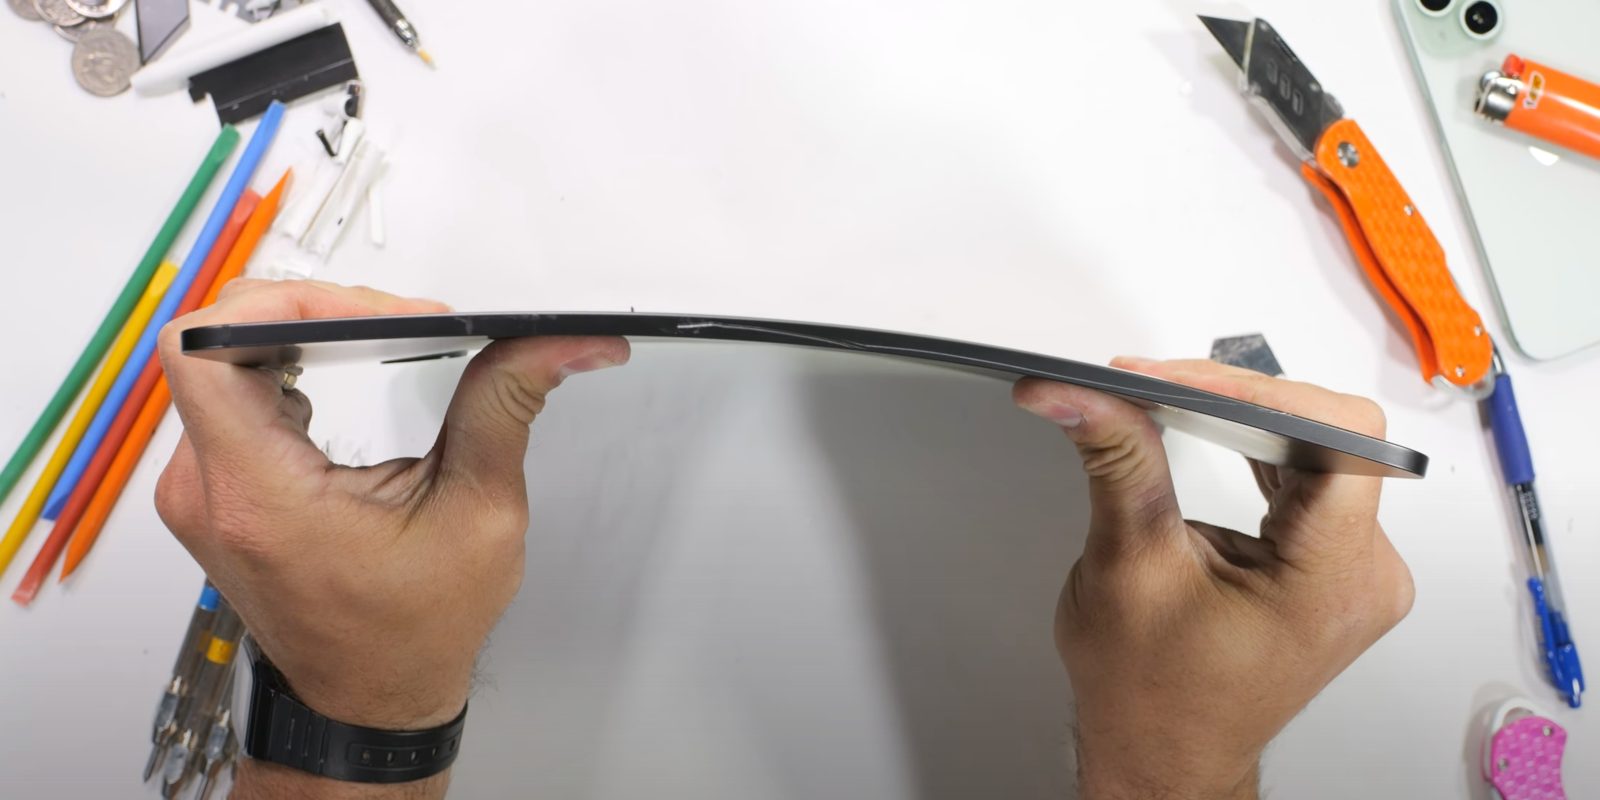 New iPad Pro performs well in extreme bend test, beats previous-gen